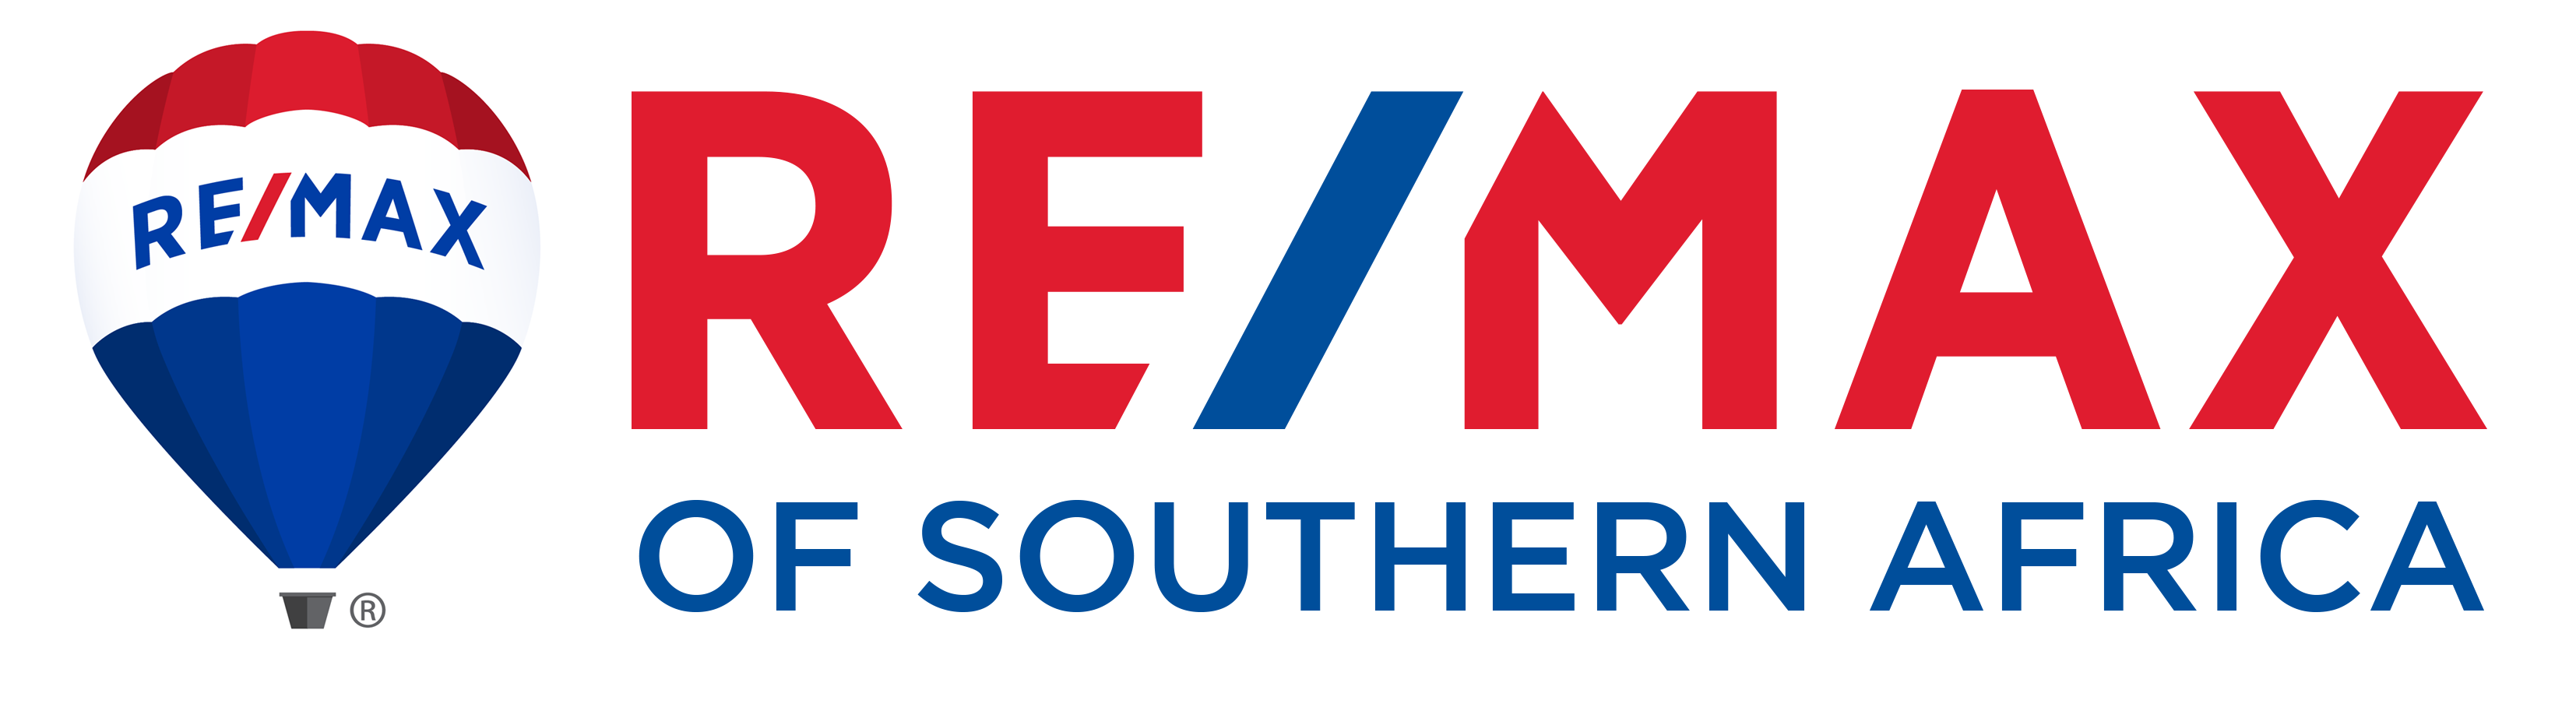 RE/MAX of Southern Africa logo